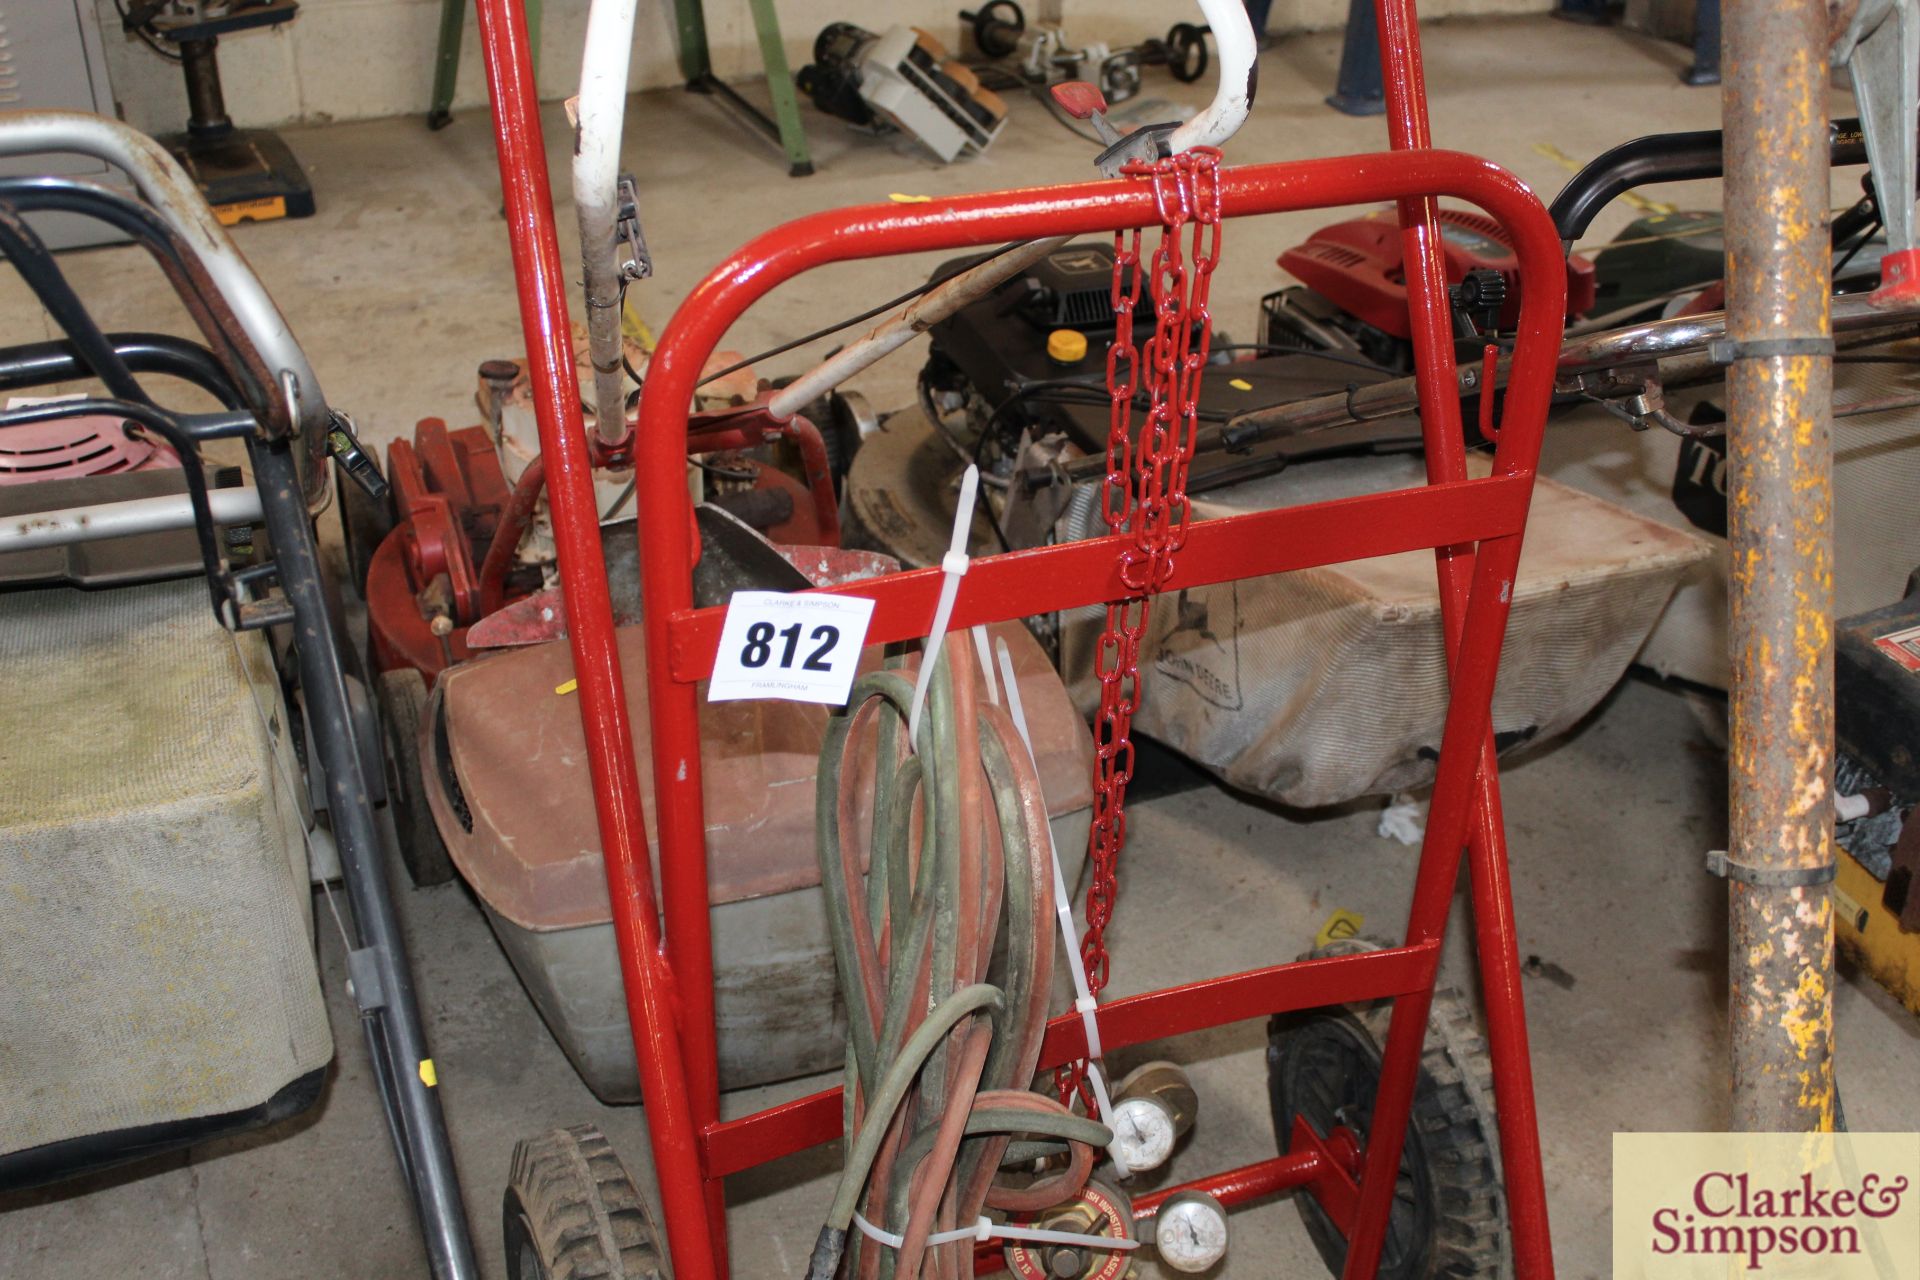 Welding trolley with hoses and gauges. - Image 3 of 4